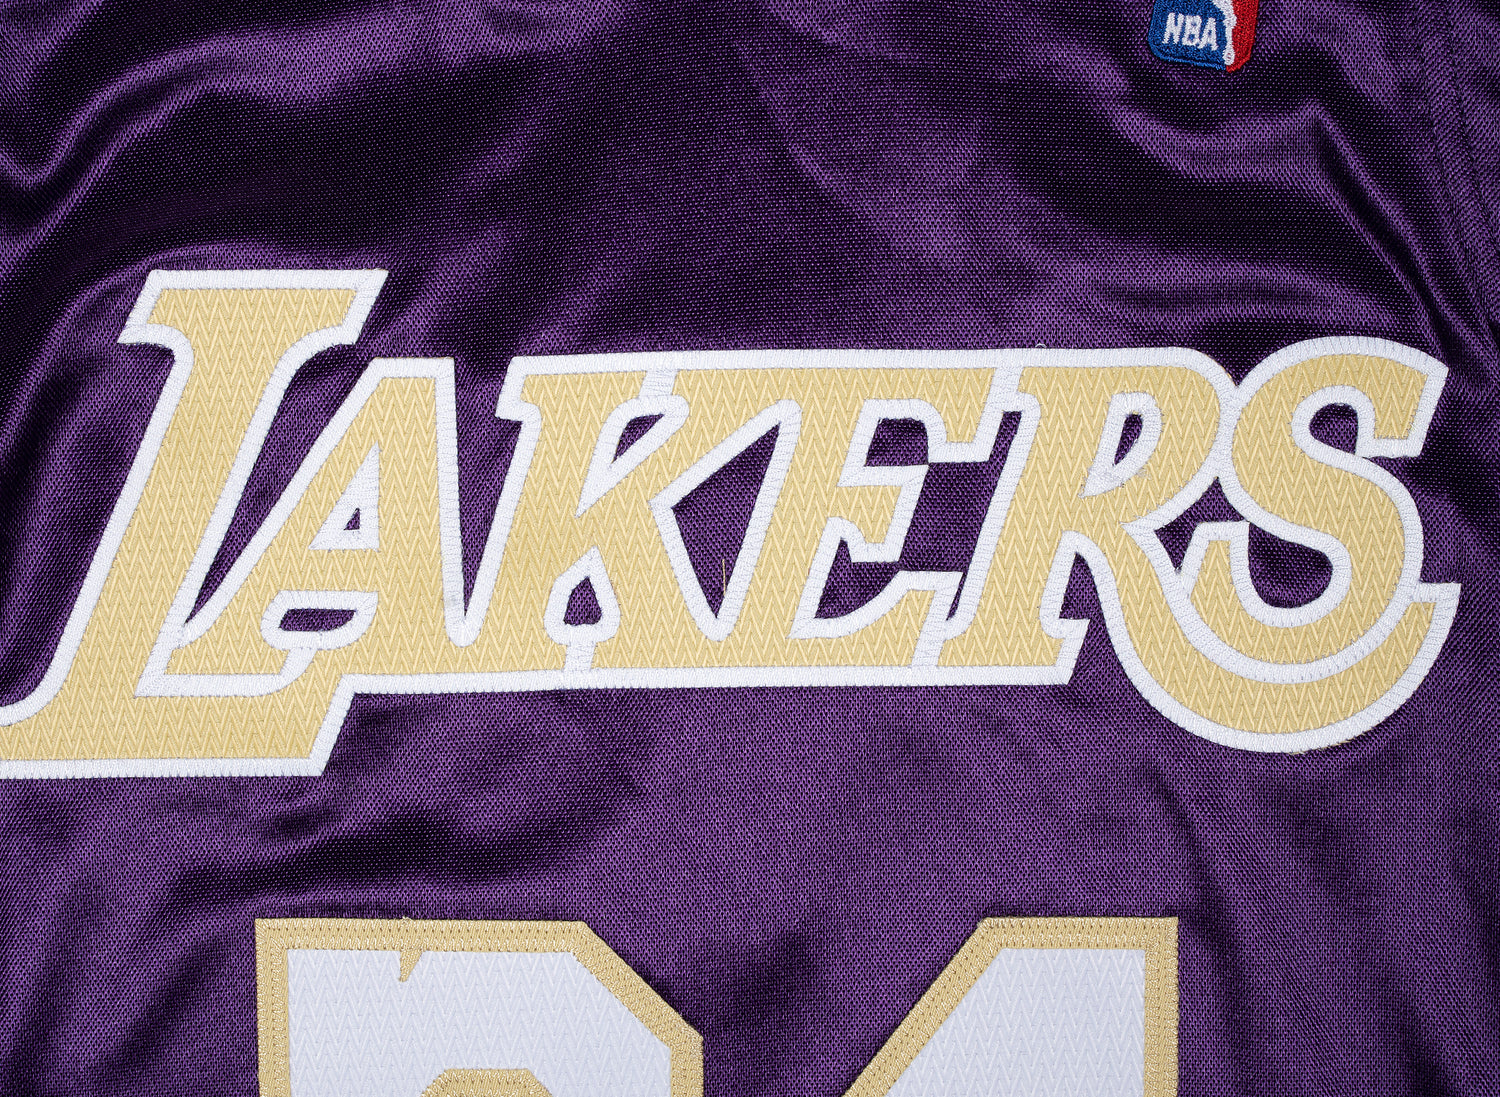 LOS ANGELES LAKERS KOBE BRYANT HALL OF FAME AUTHENTIC JERSEY  AJY4CP20022-LALPURP96KBR